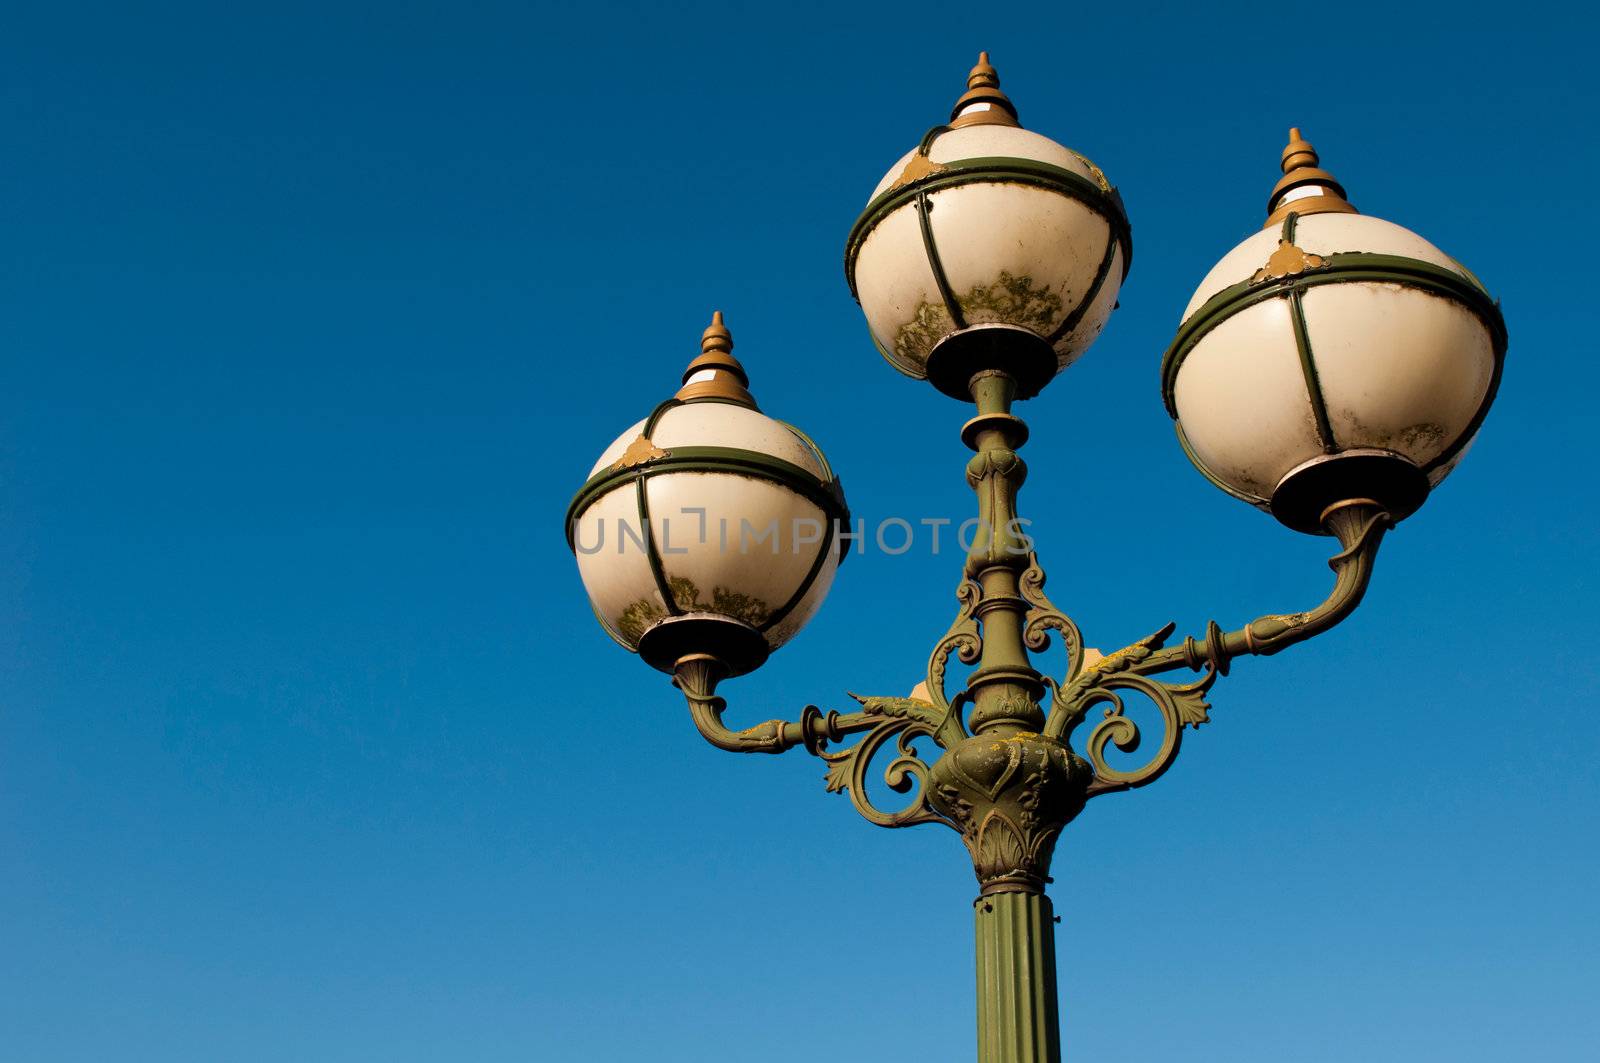 Antique lamp post by luissantos84